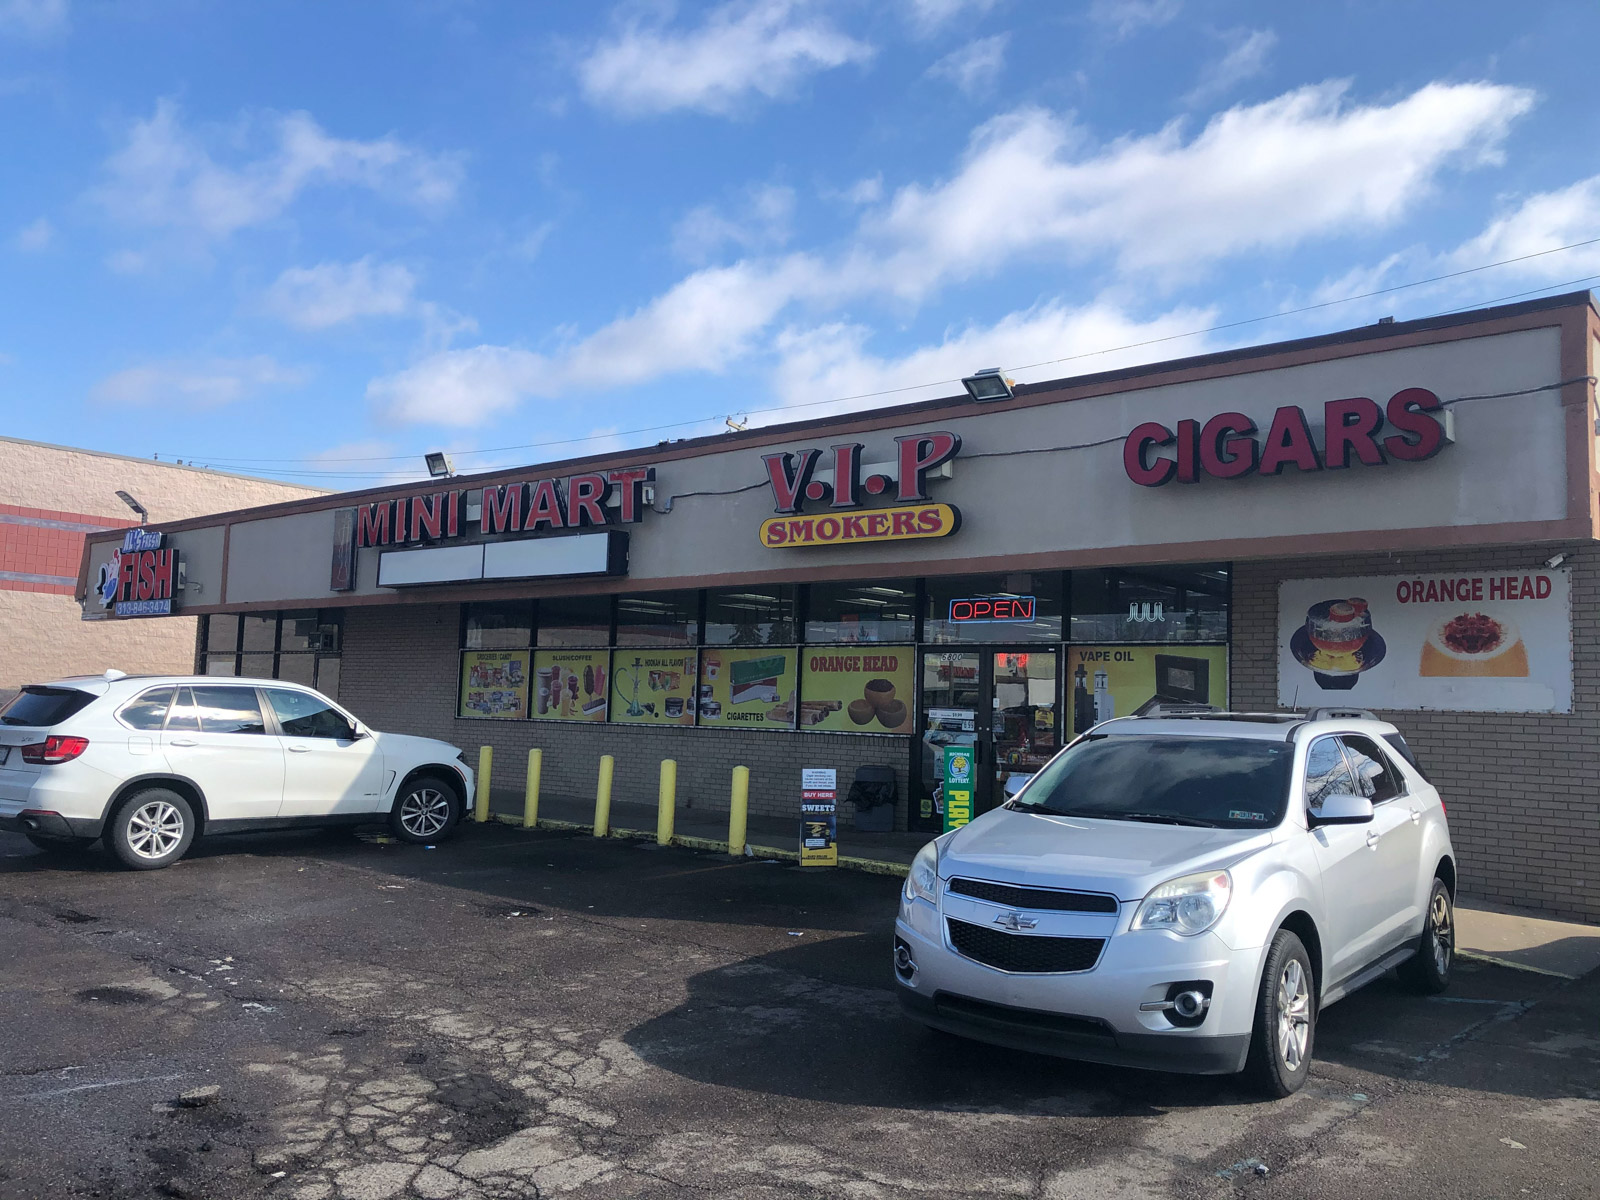 Commercial Building Purchase Mortgage - Dearborn